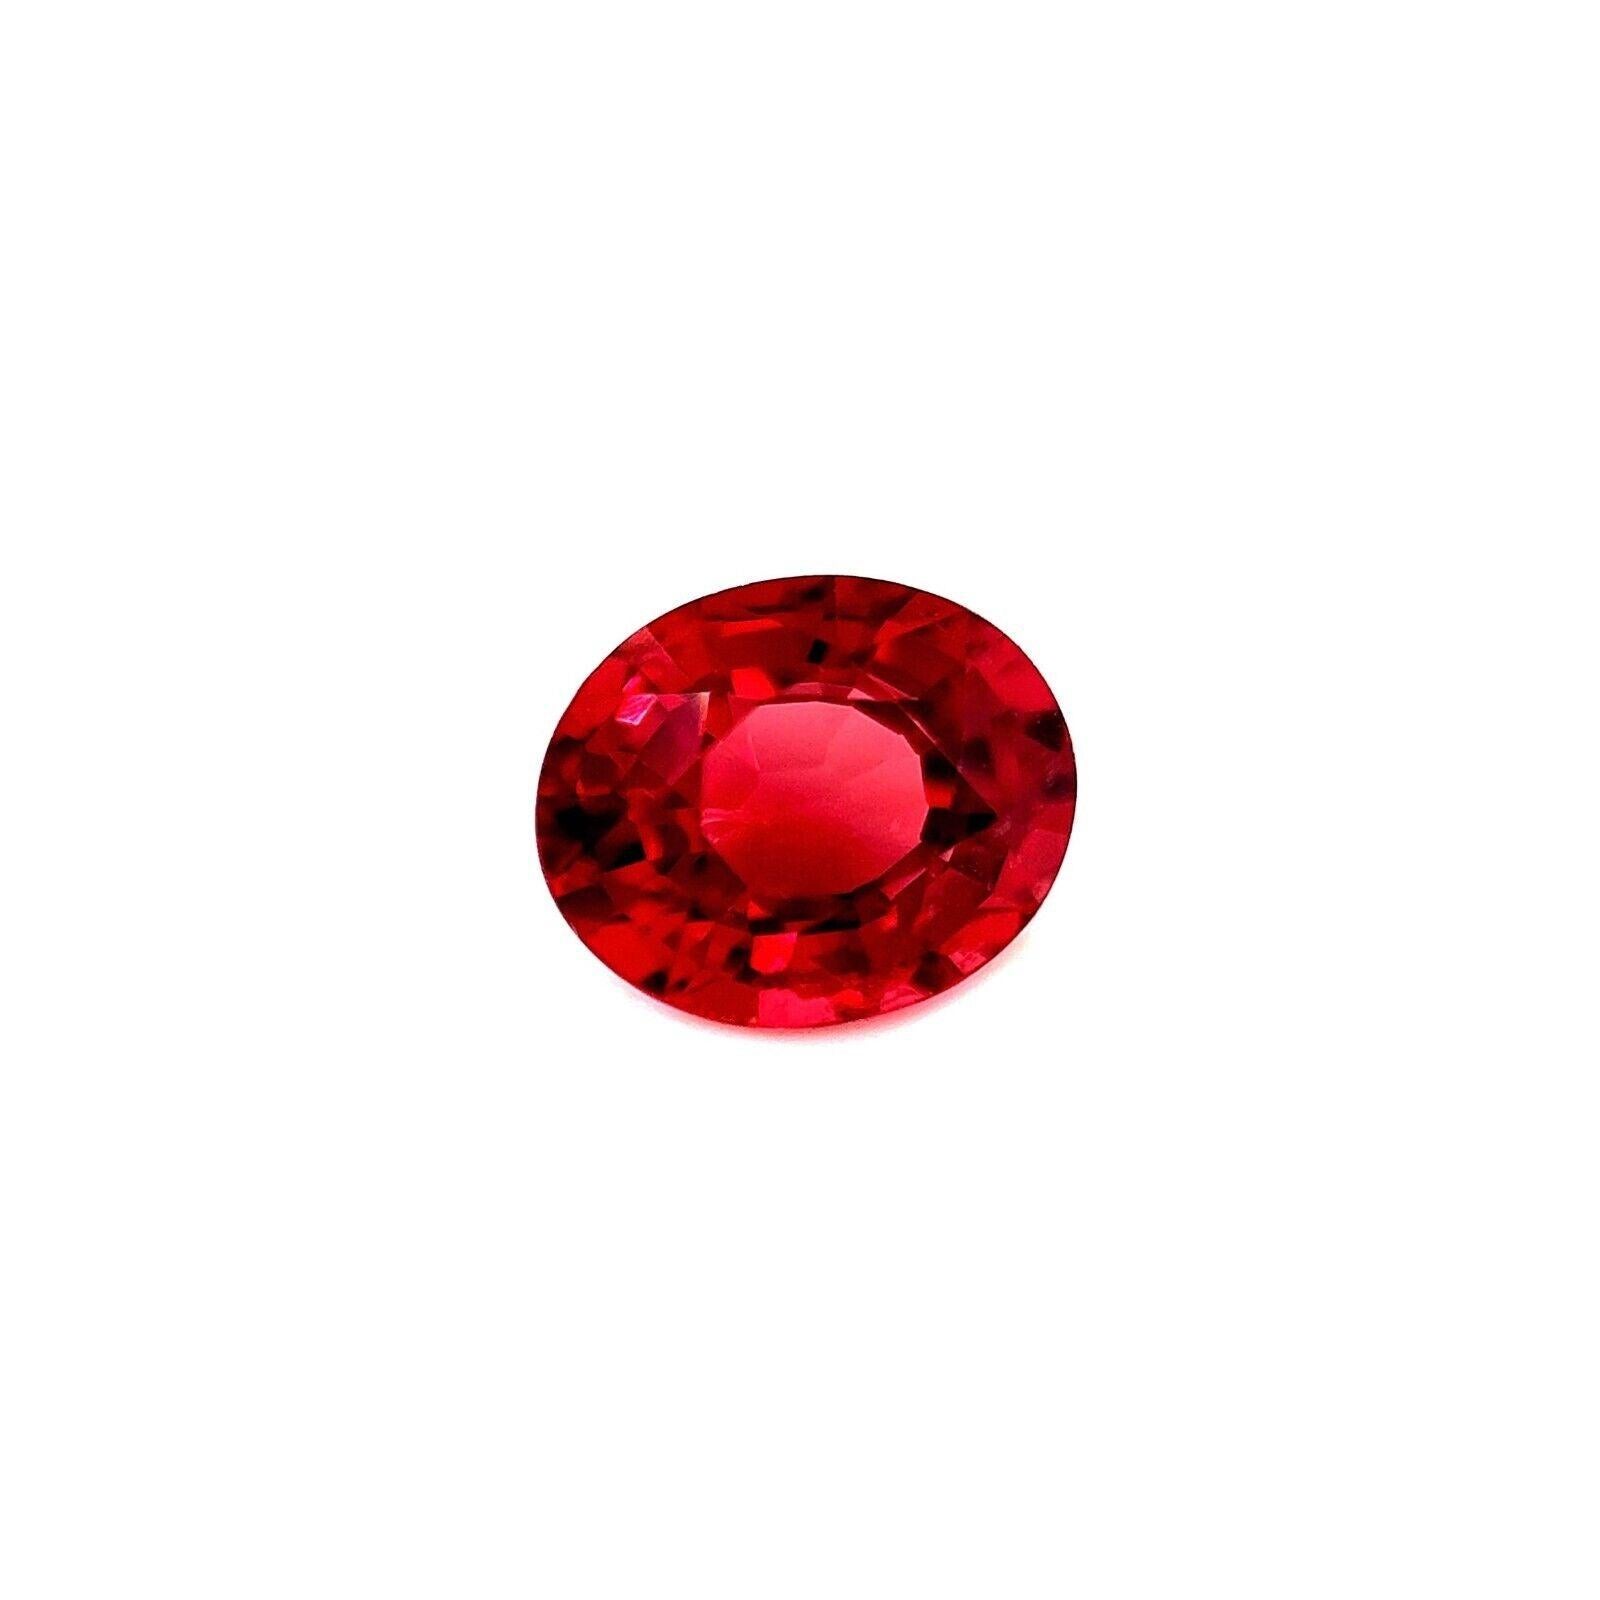 Natural 1.53ct Vivid Purple Pink Rhodolite Garnet Oval 6.1x7.6mm Loose Gem

Natural Loose Rhodolite Garnet Gem.
1.53 Carat with a beautiful vivid purple pink colour and good clarity, a clean stone with only some small natural inclusions visible when